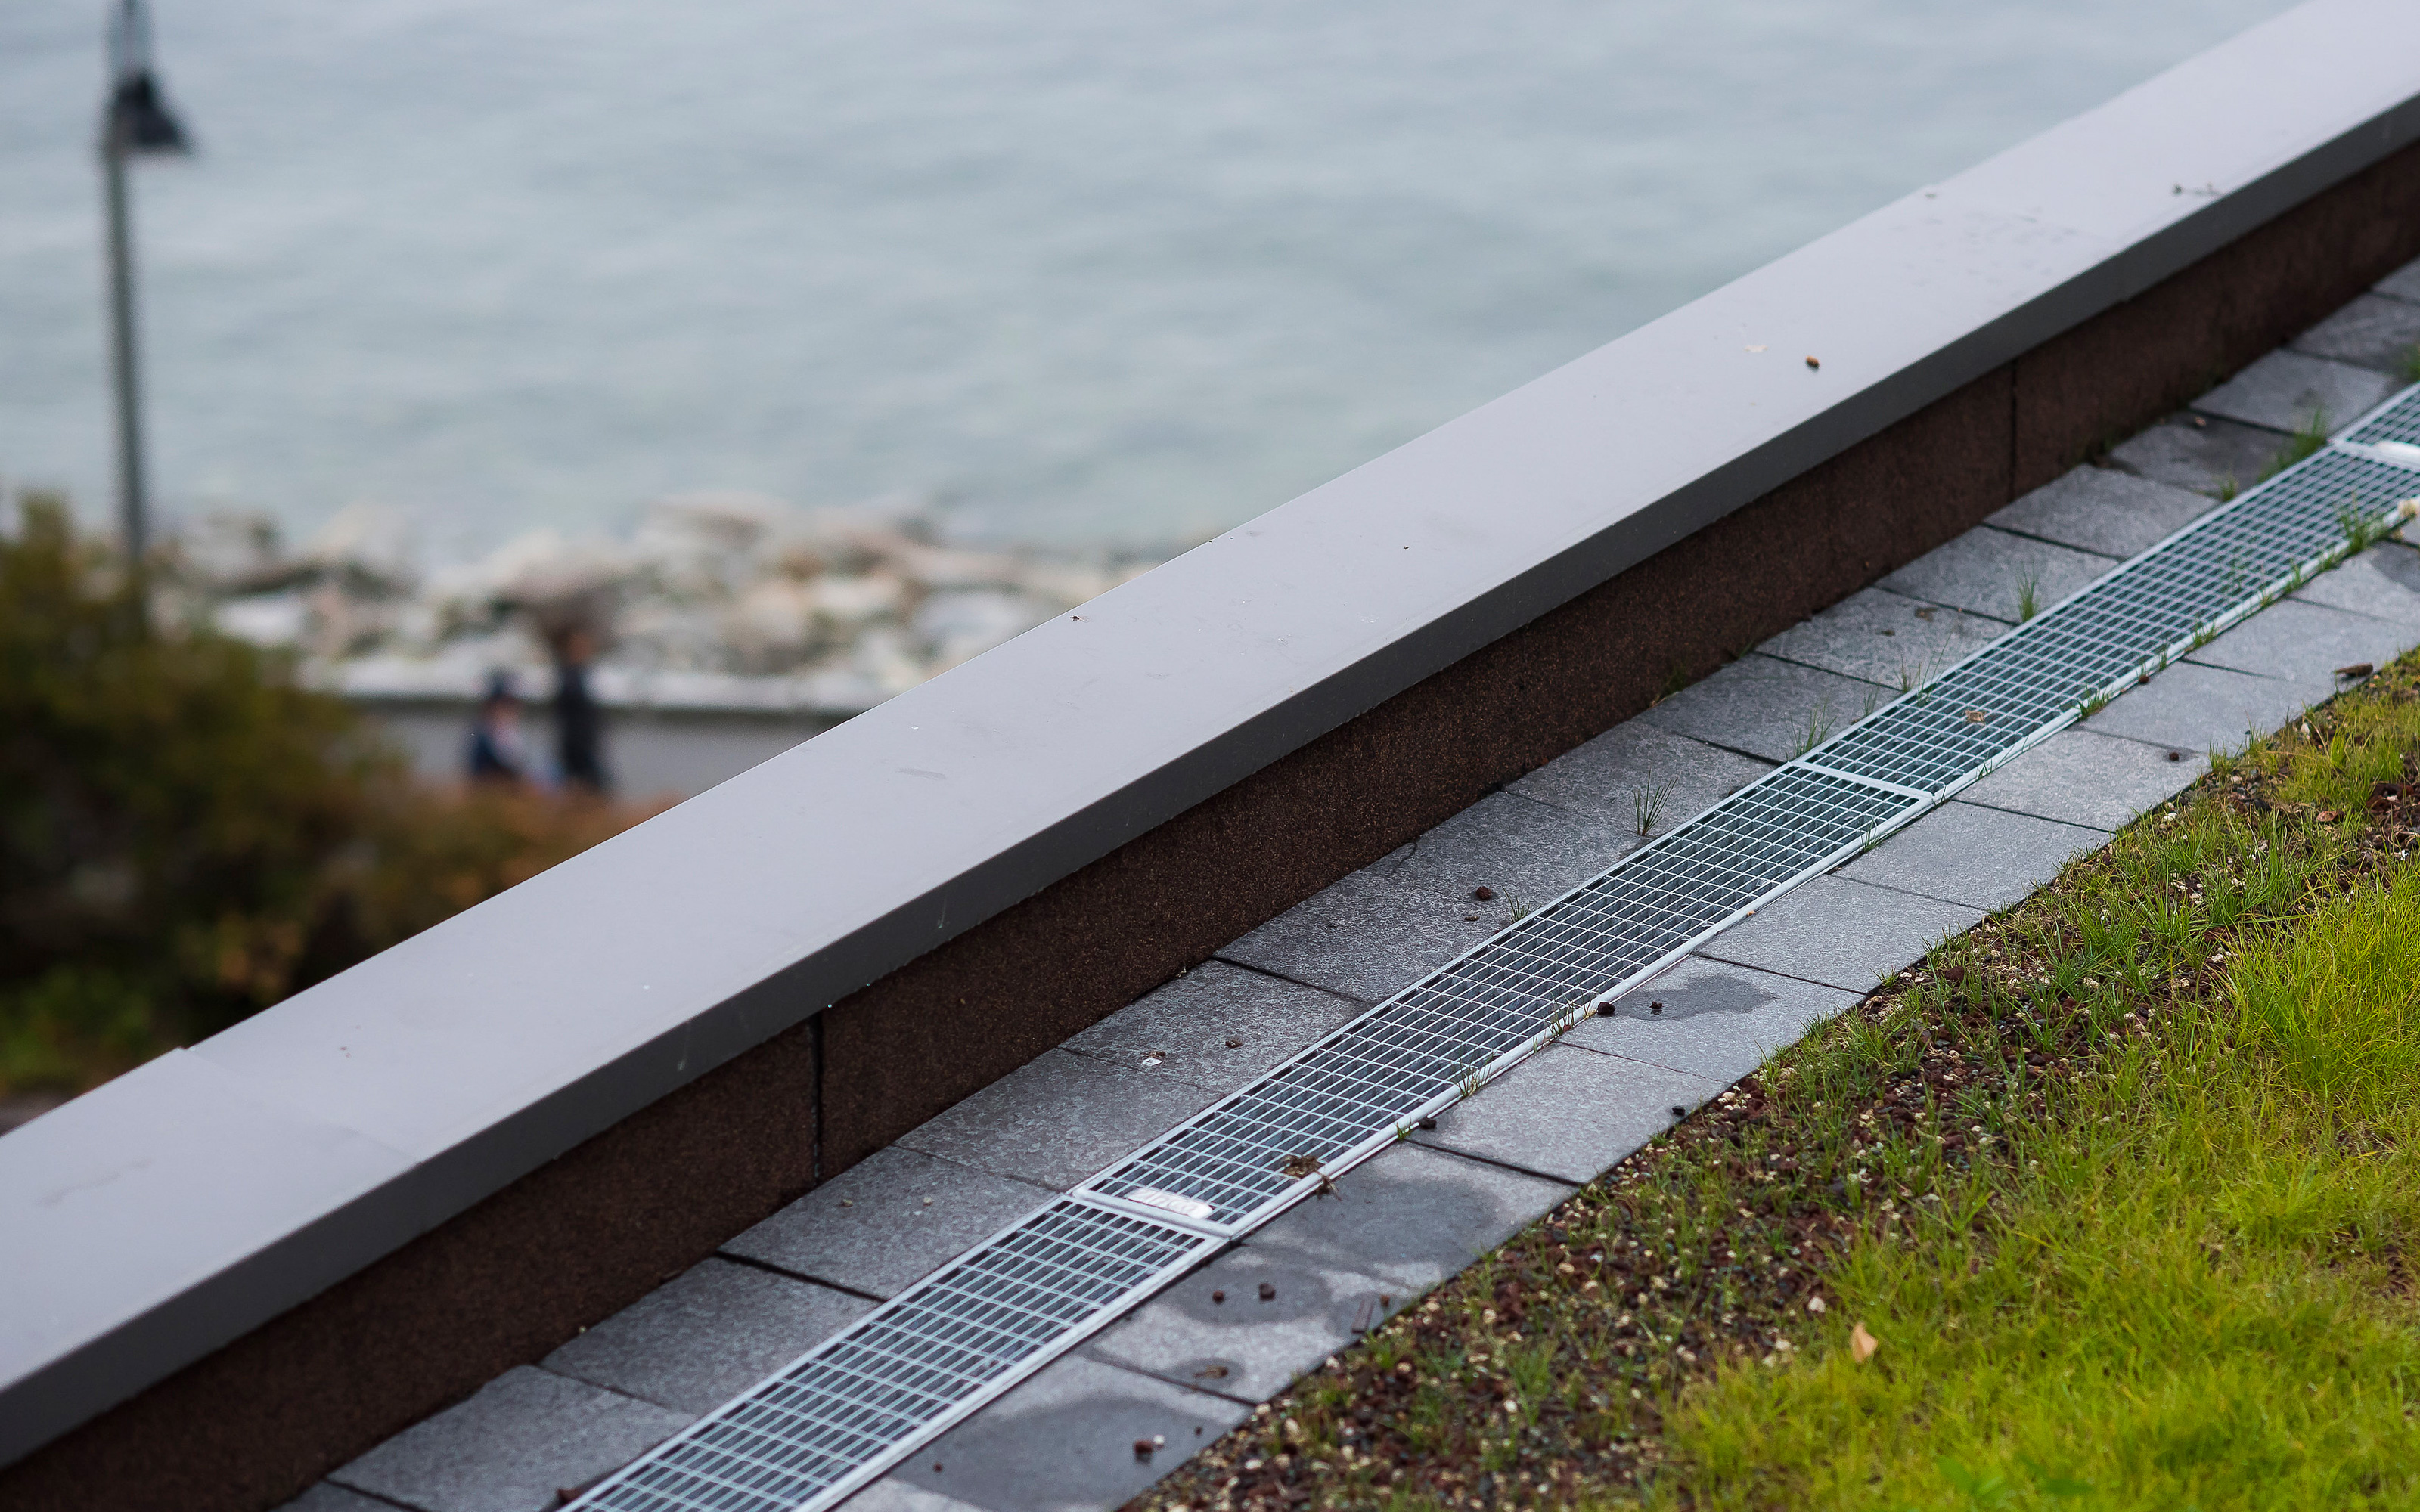 Drainage channels on a green roof